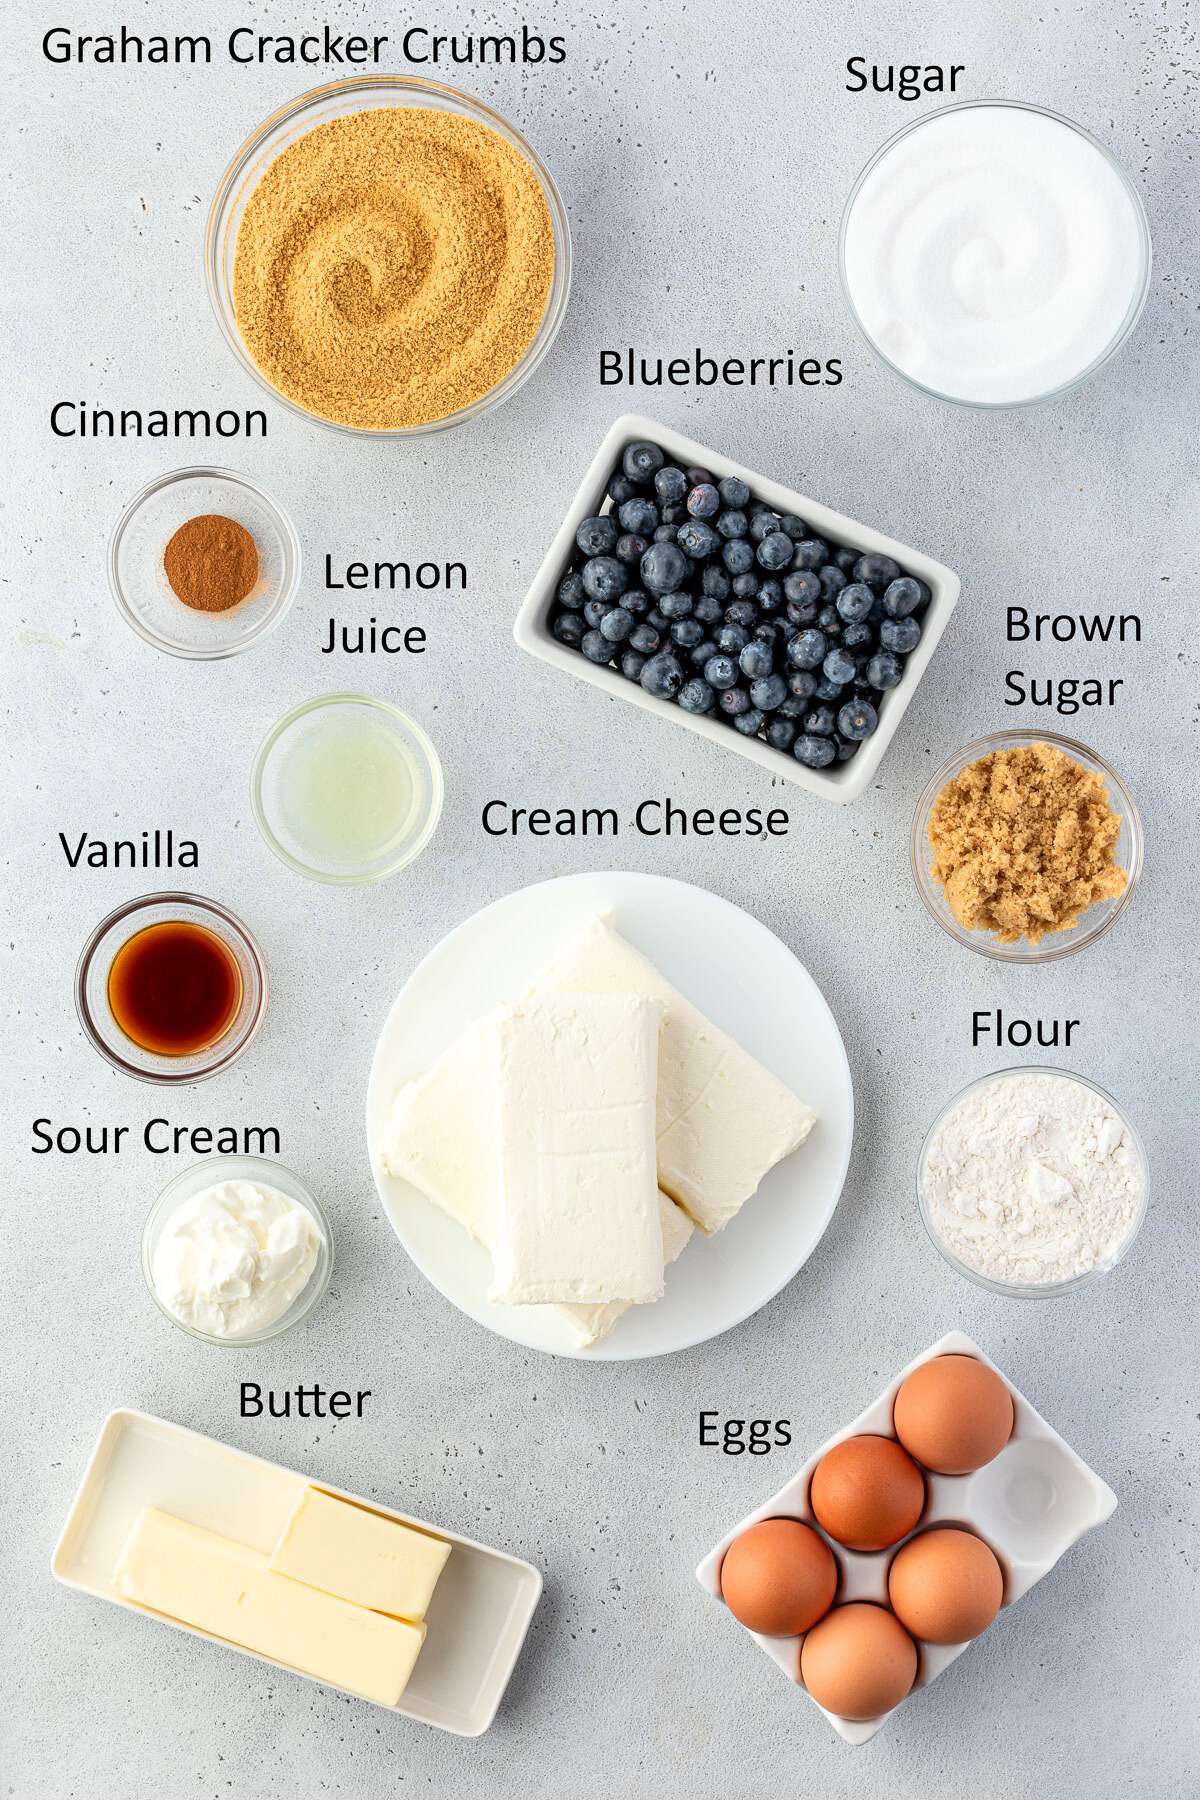 Recipe ingredients neatly arranged on a gray surface and labeled, items include graham cracker crumbs, sugar, blueberries, brown sugar, flour, eggs, cream cheese, butter, whipped cream, vanilla, lemon juice, sour cream, and cinnamon.